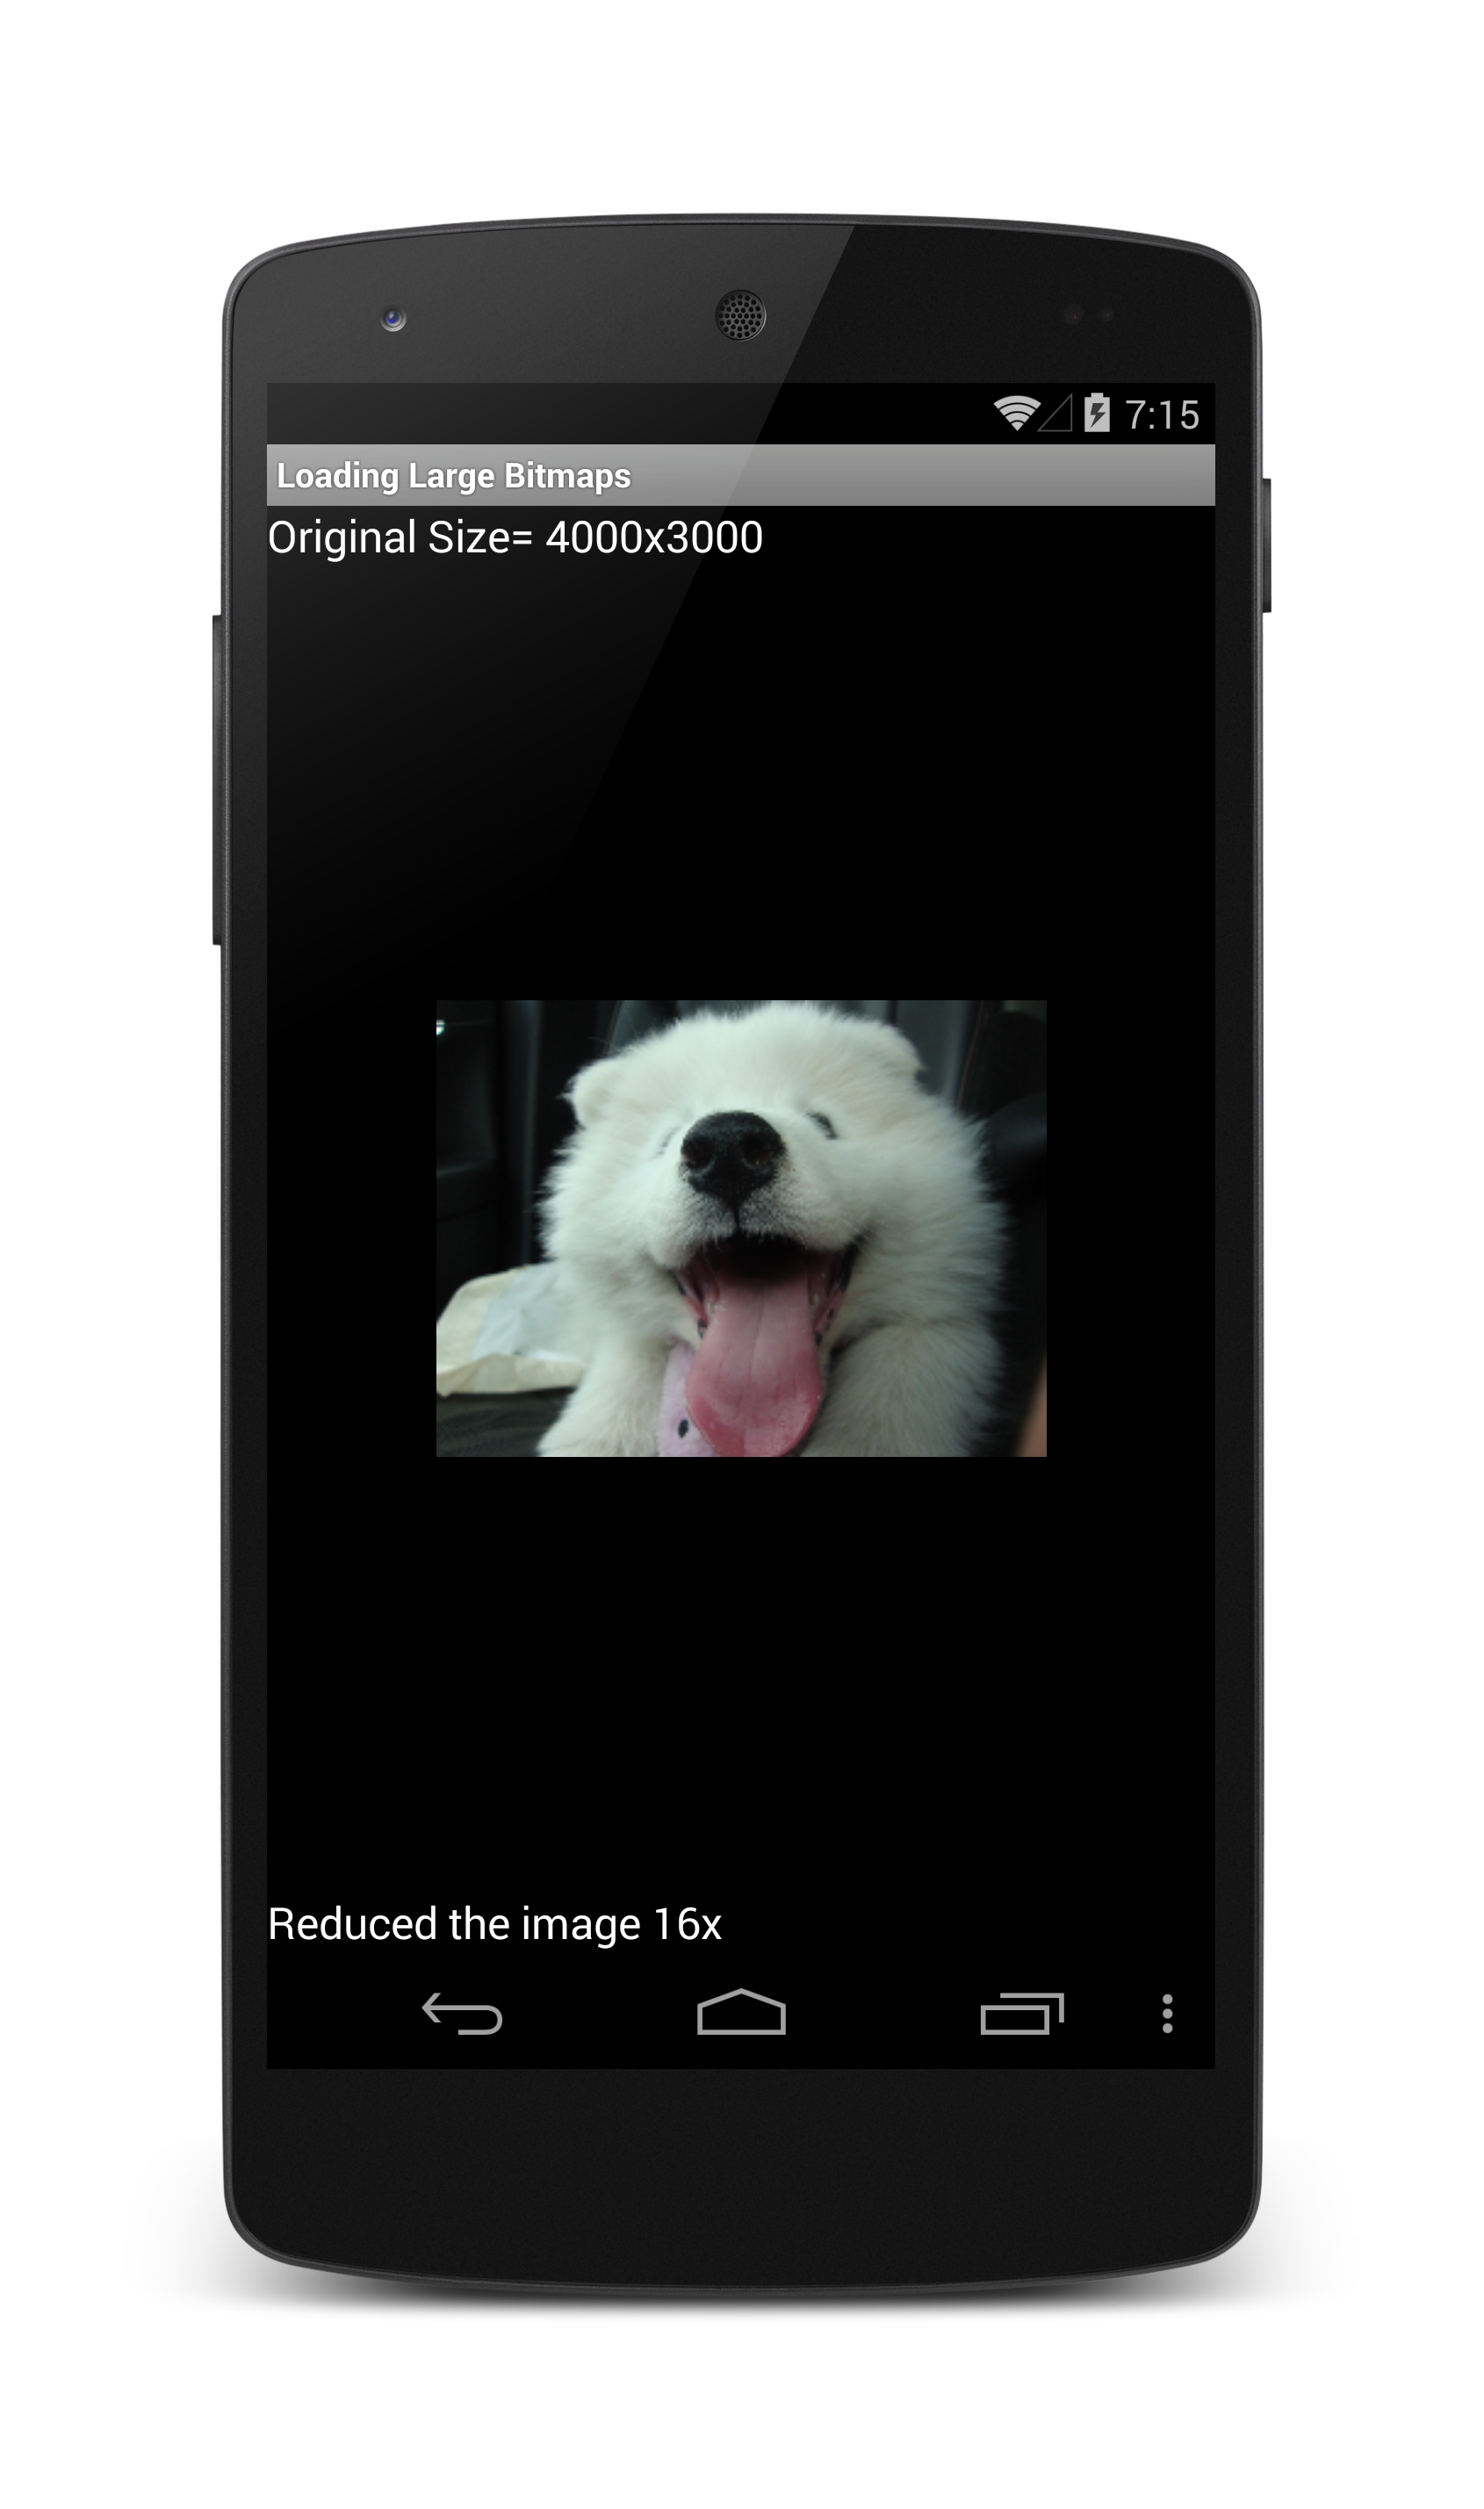 Android app showing an image of a dog